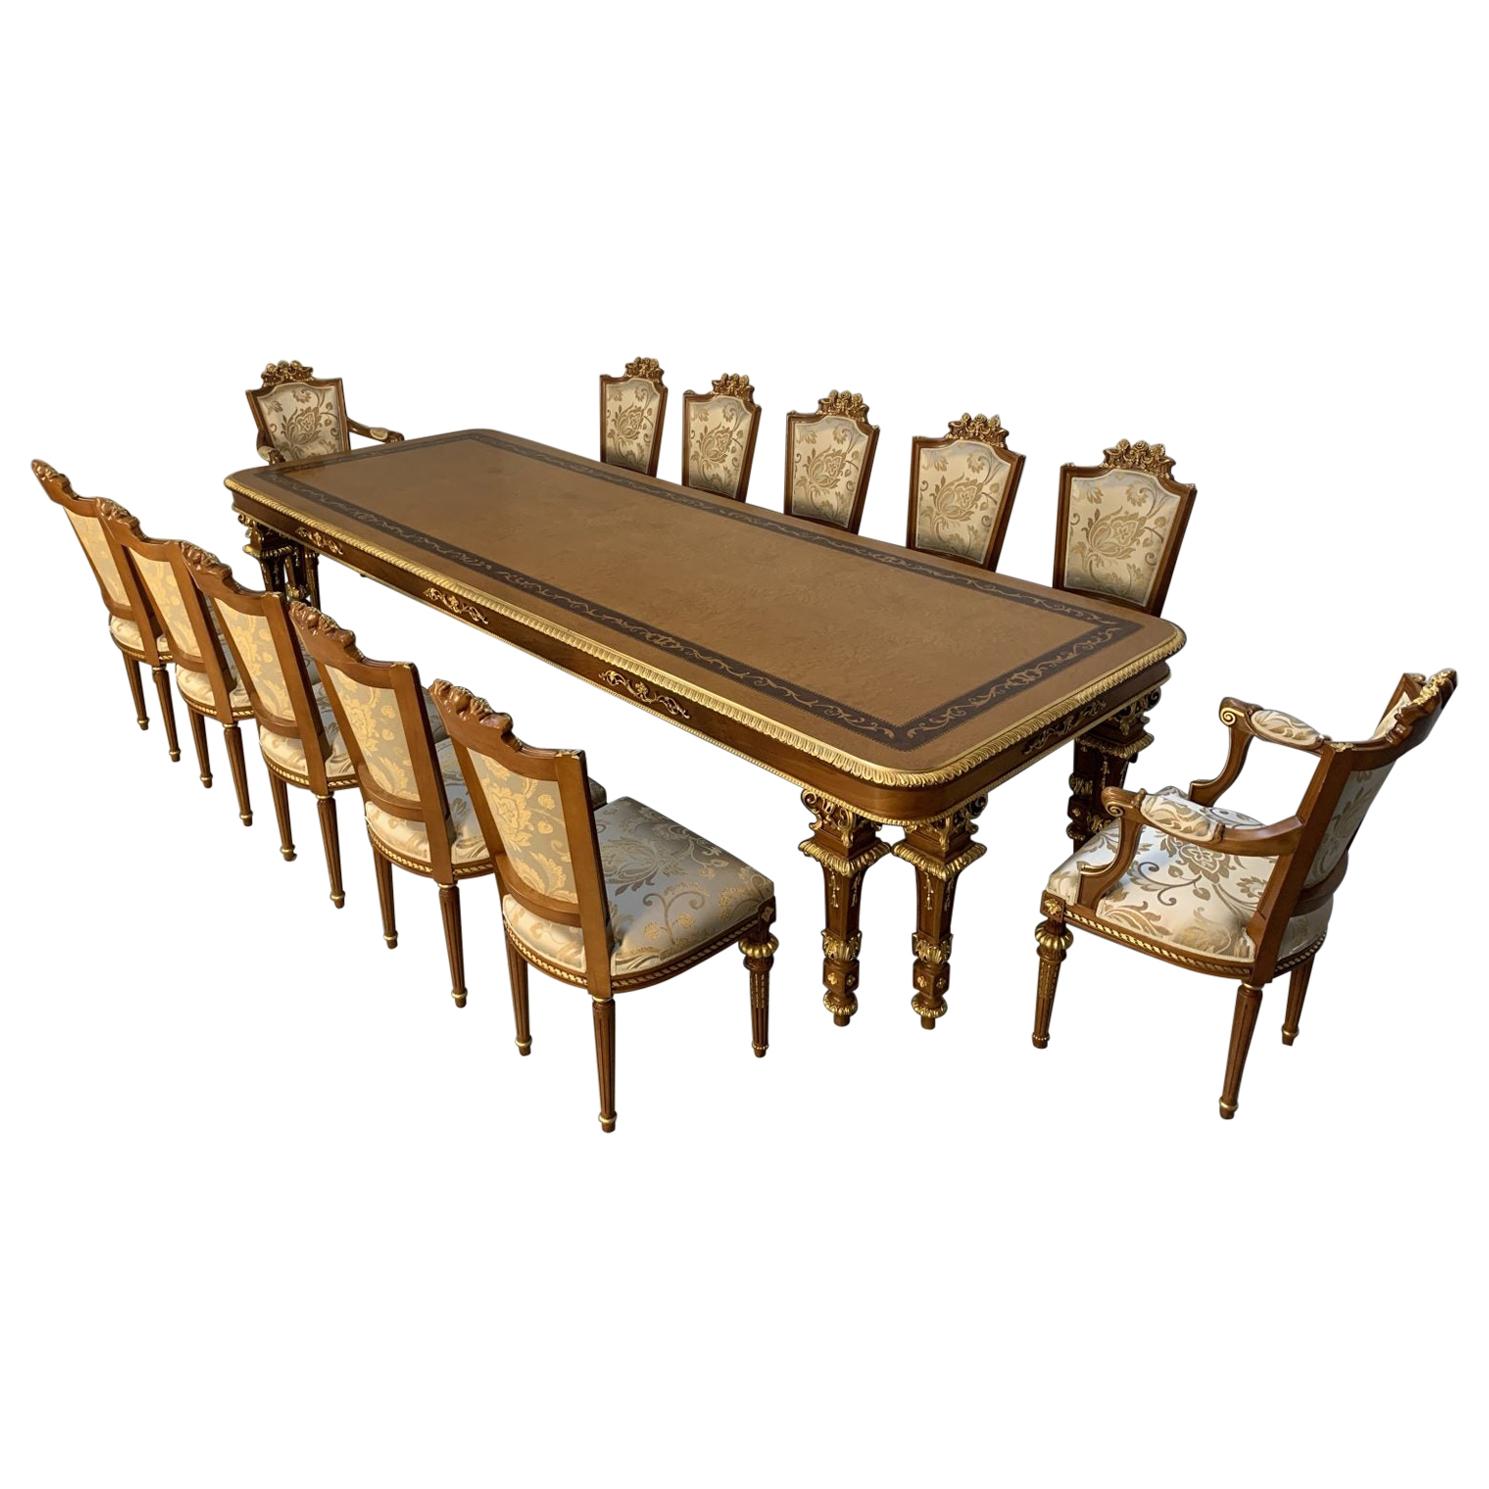 Asnaghi “Eubea” Dining Table and 12 Chair Suite in Harwood, Gilt and Silk